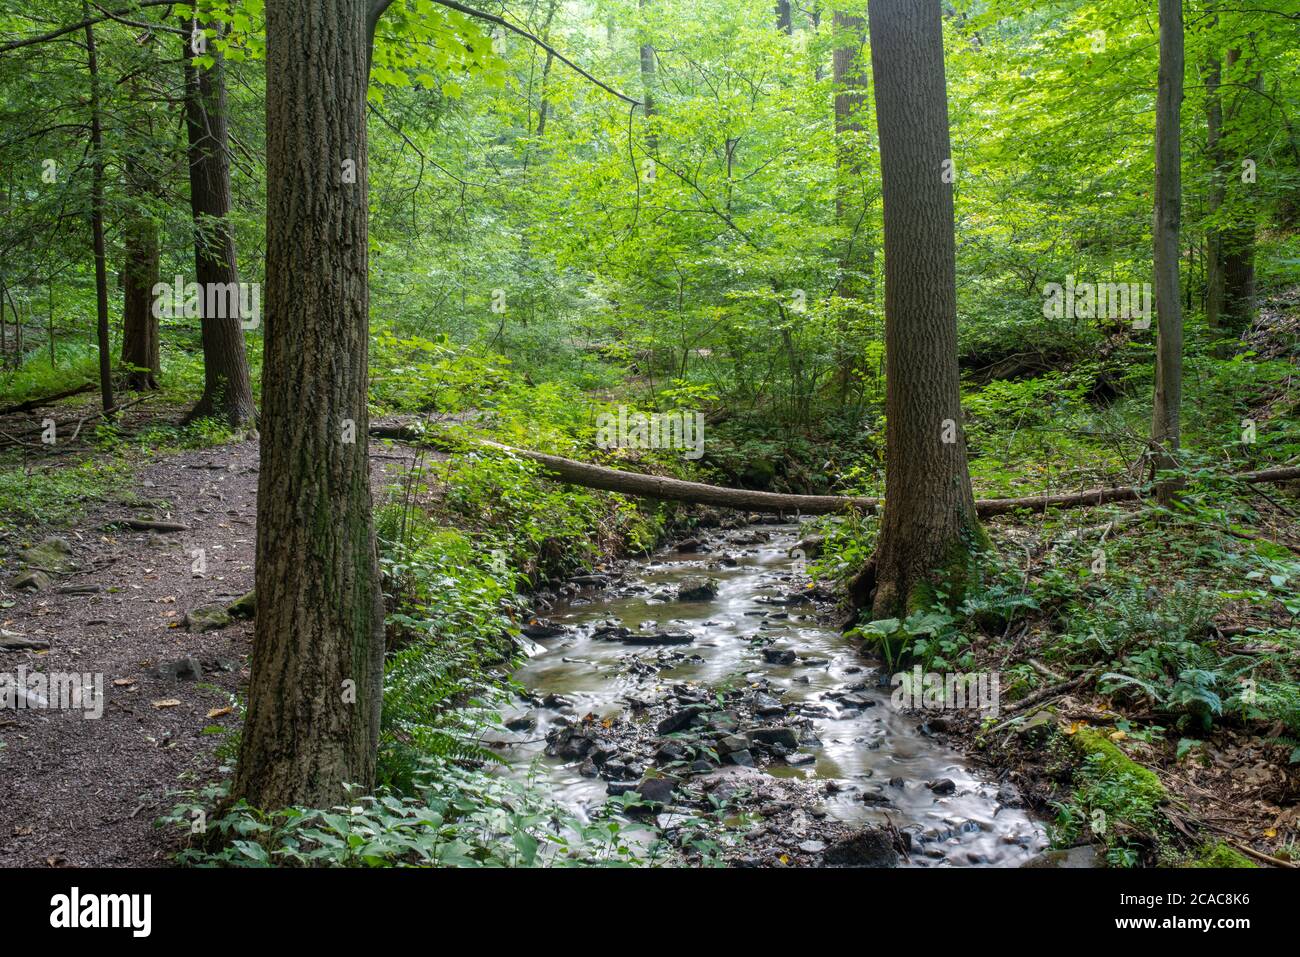 Beautiful calming nature scene. Full frame image shot in natural dappled sunlight. Long exposure gives the flowing stream a soft, surreal glow. Stock Photo